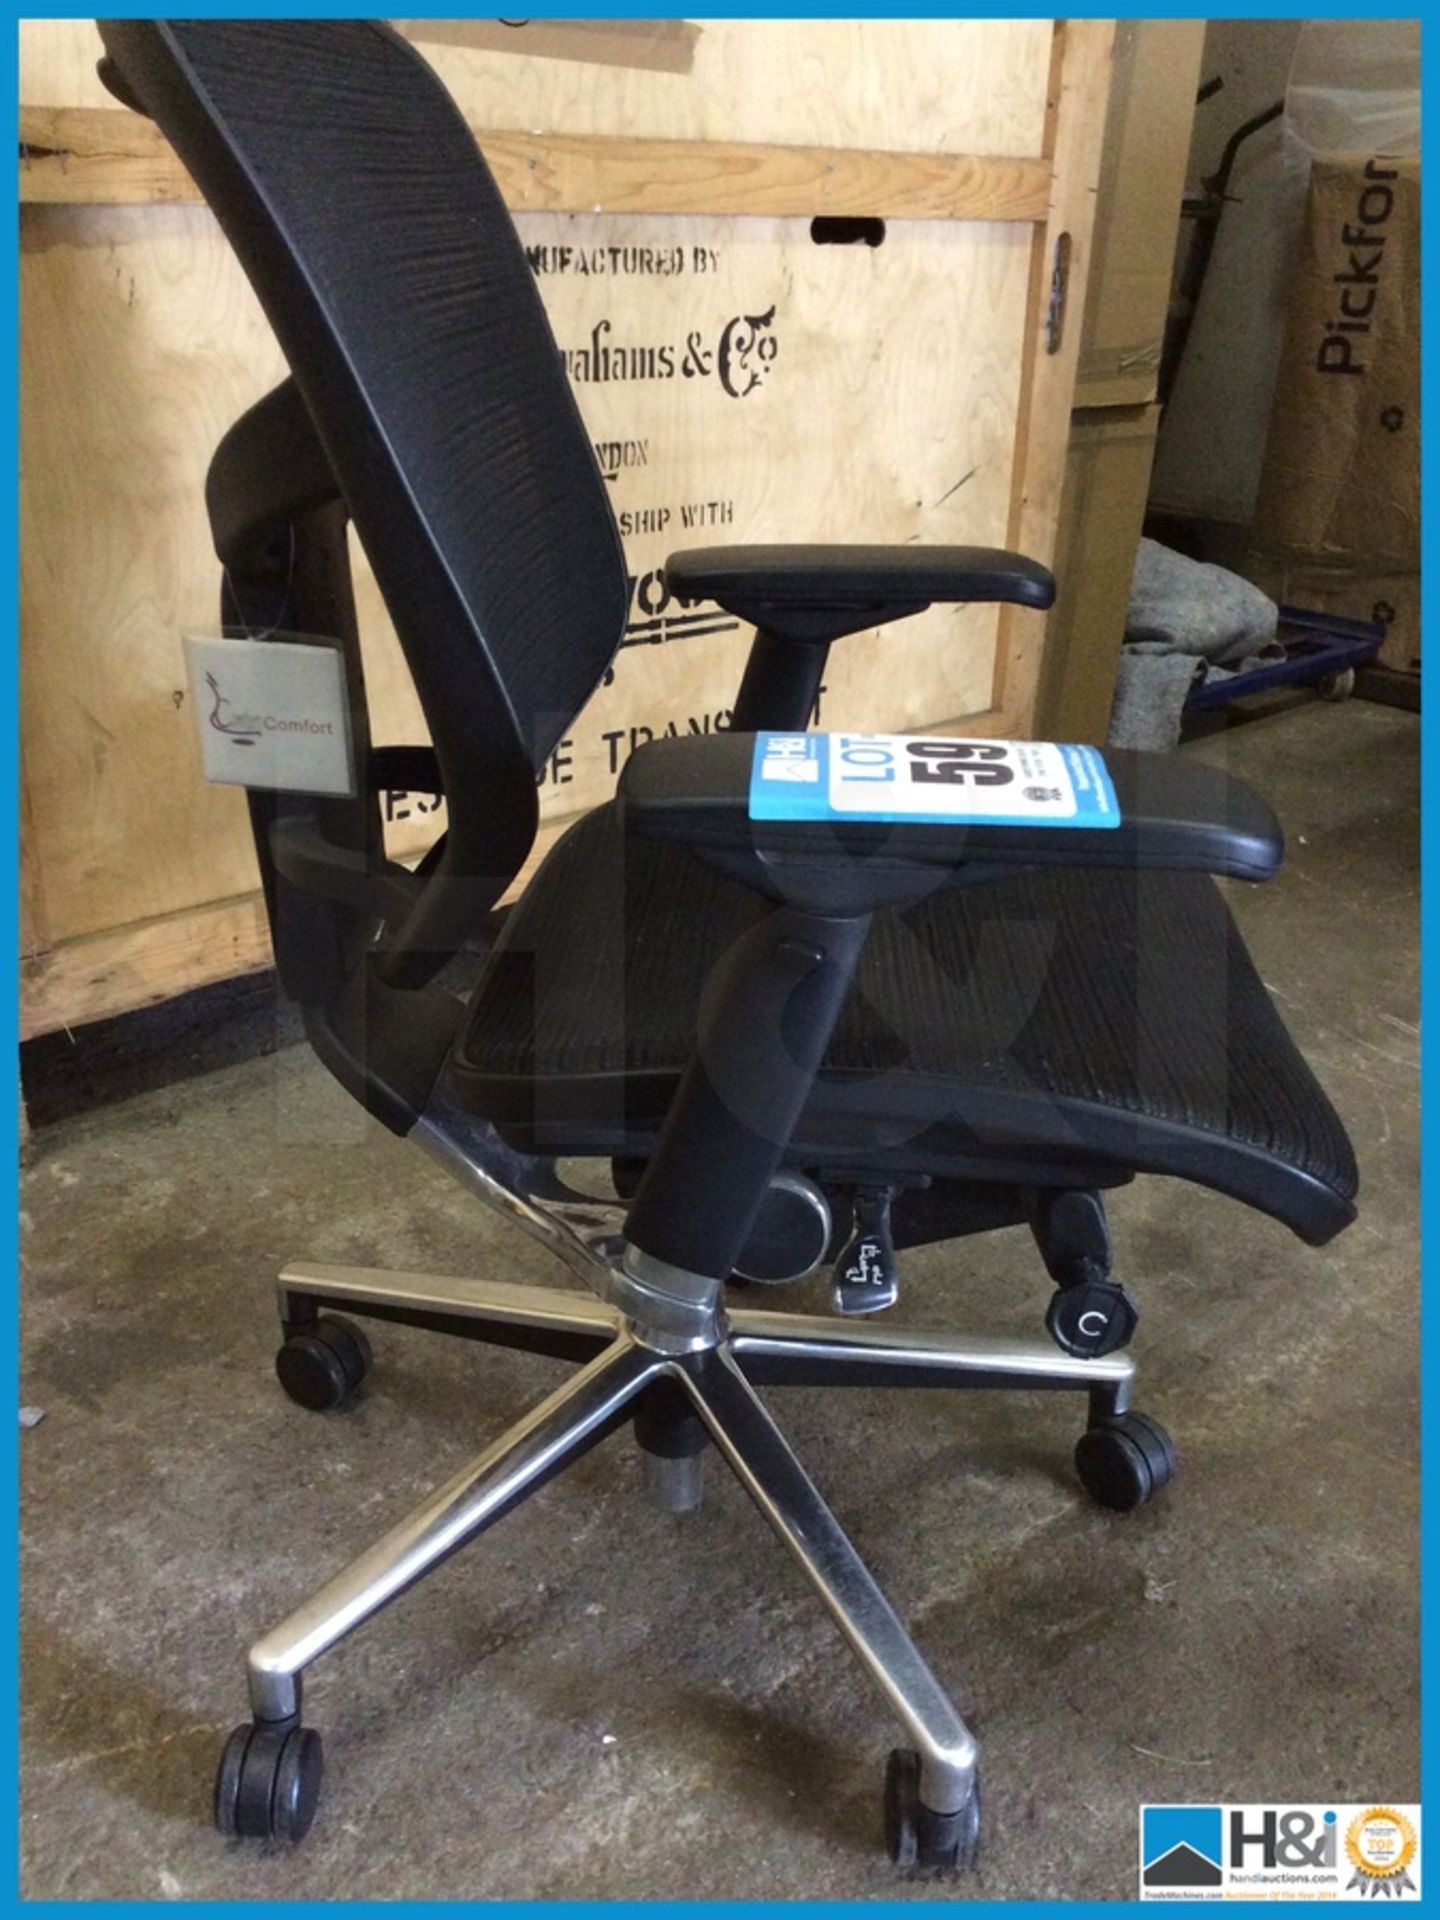 Enjoy Ergonomic High back mesh office Chair. Certified to BSEN5459 pt2, Top Quality chair - Image 2 of 3